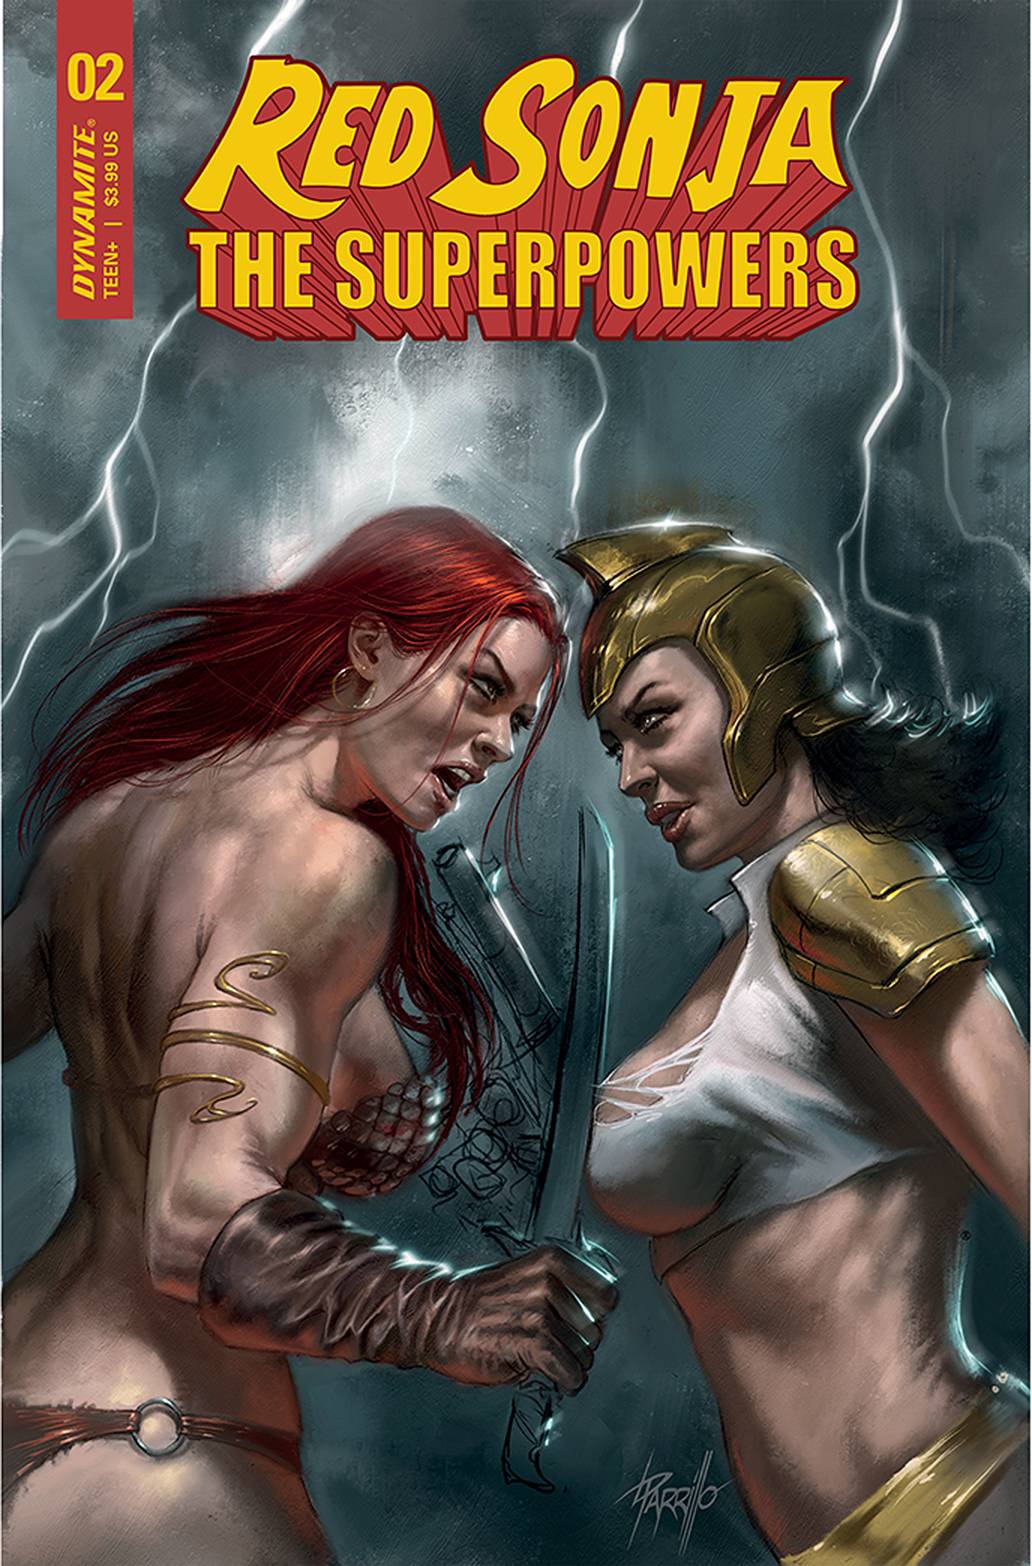 RED SONJA THE SUPERPOWERS #2 CVR A PARRILLO